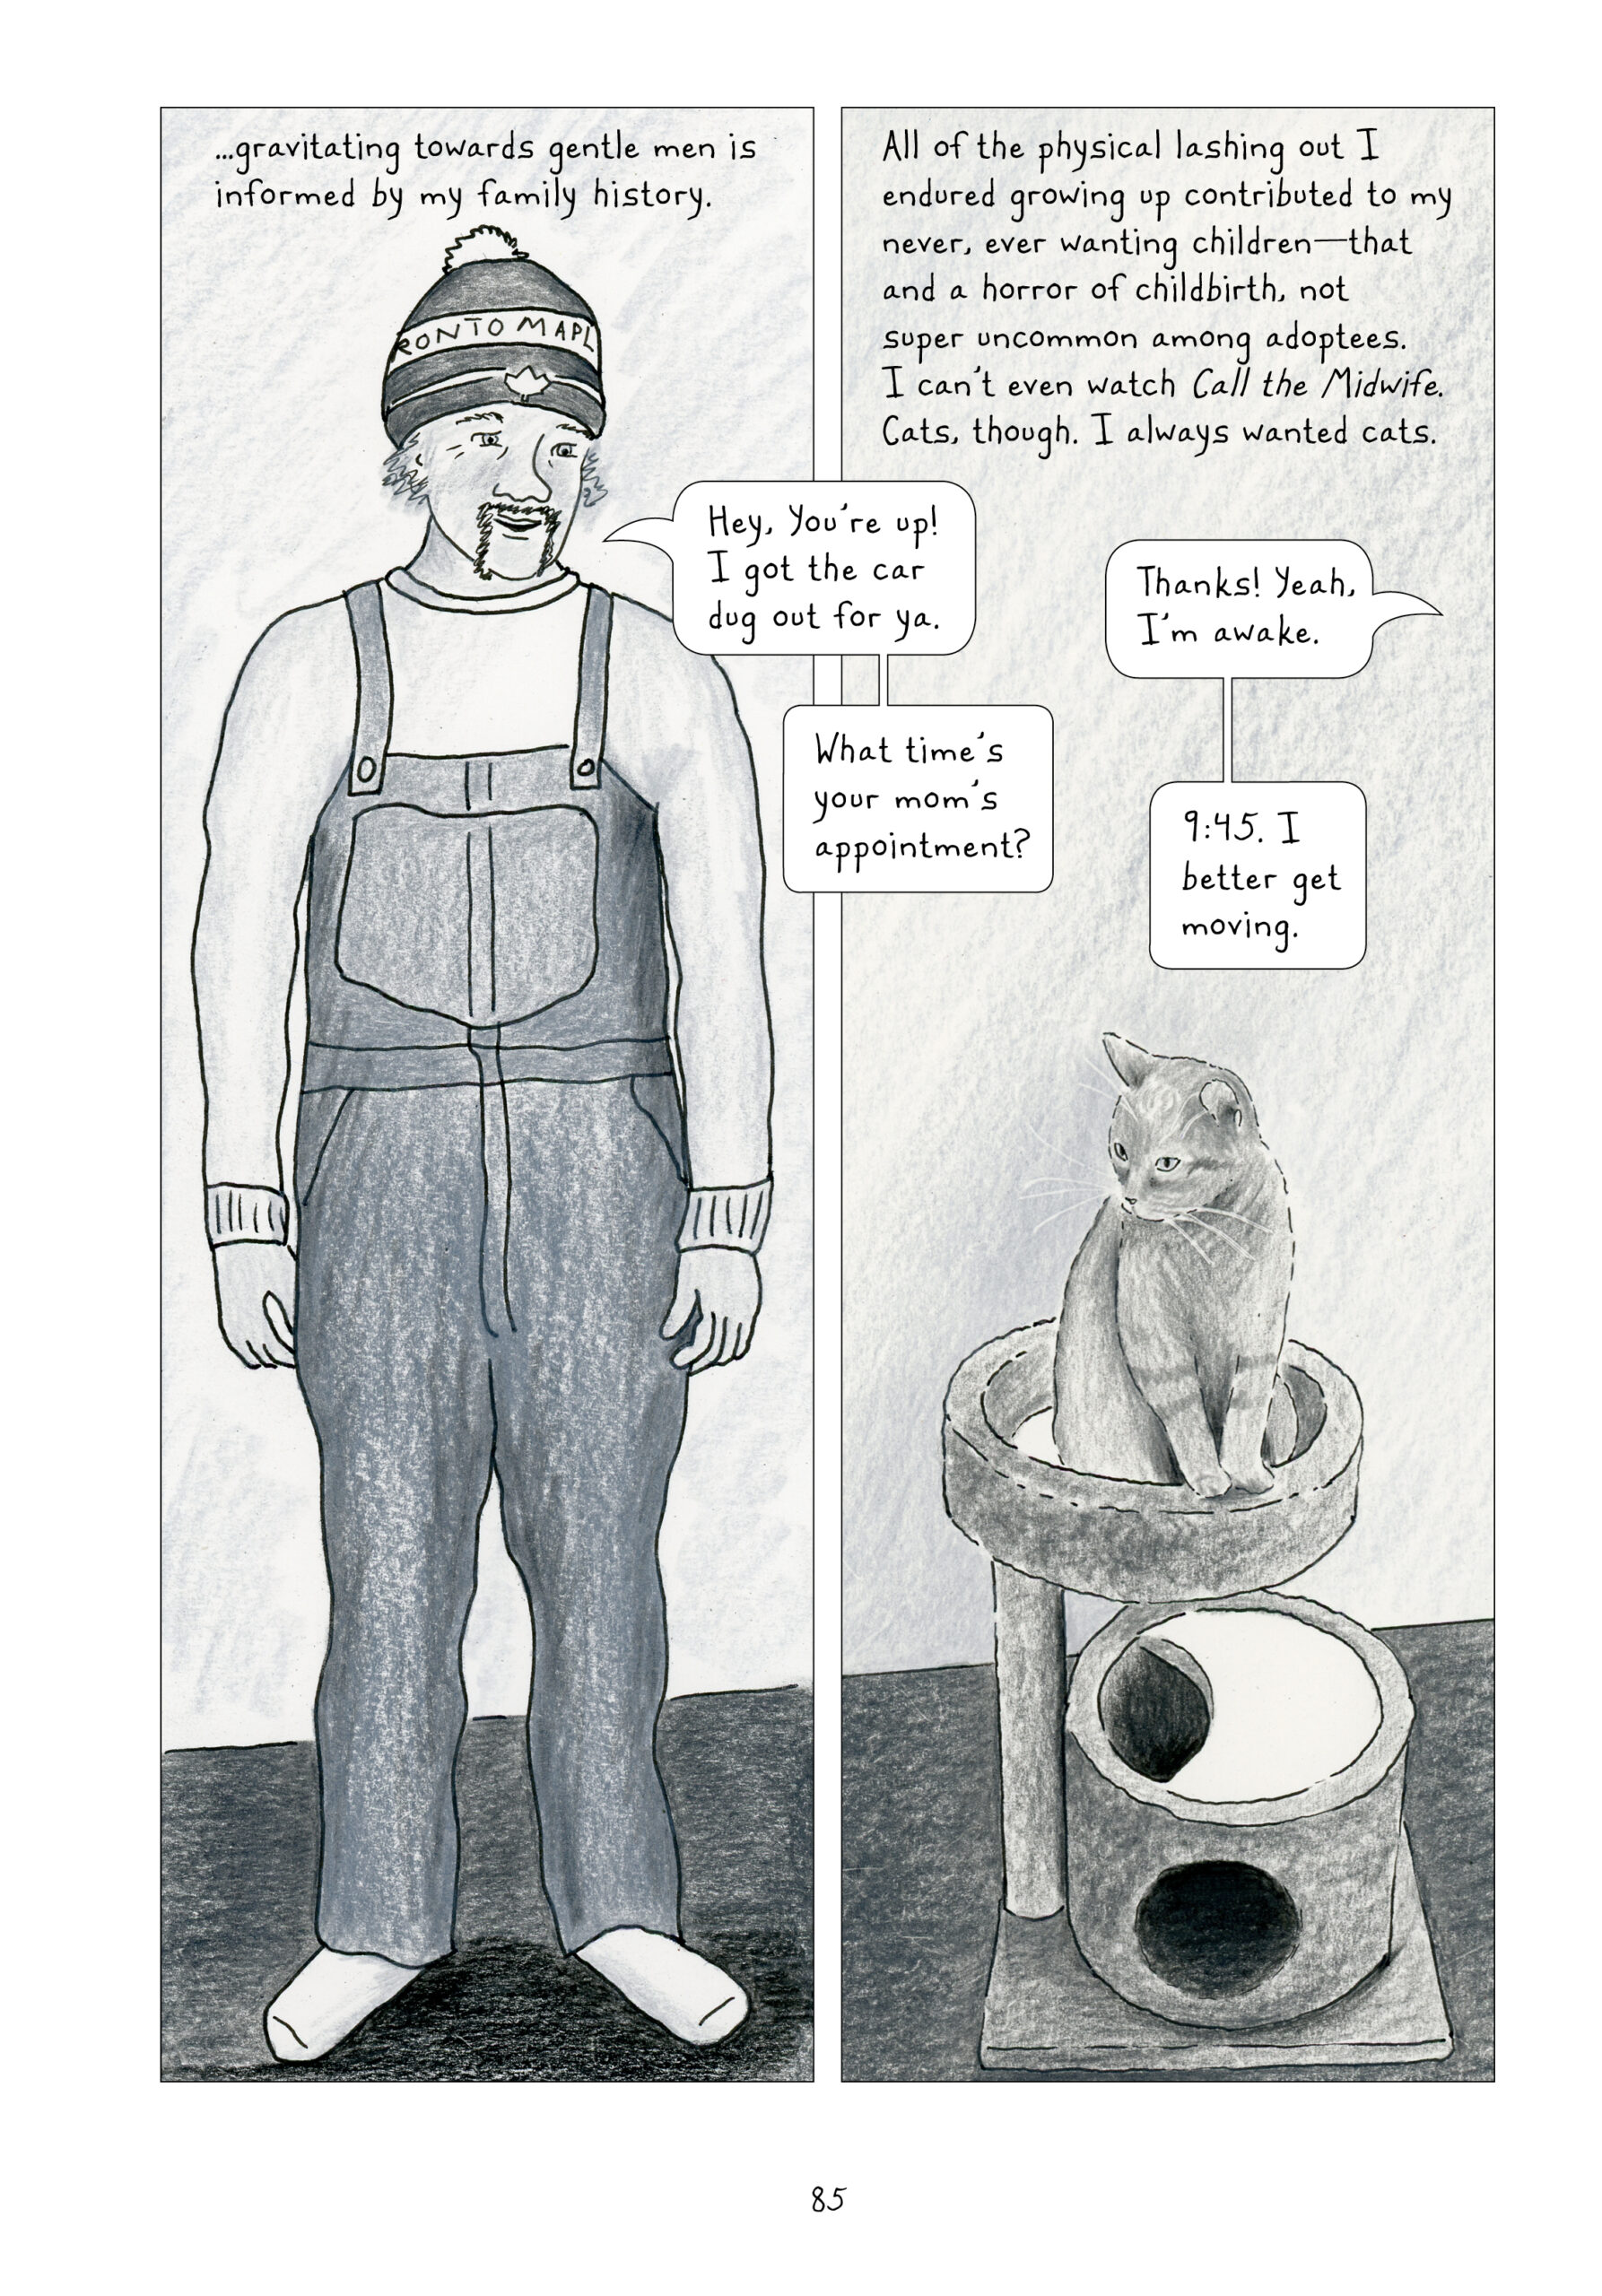 This page is split vertically into two even panels, both gray and white. The left panel shows a man wearing a light long-sleeve shirt, overalls, socks, and a Toronto Maple Leafs beanie with a pompom on top. He has light, wiry hair that goes a bit past his ears and a darker horseshoe mustache. He is smiling and talking. His body faces the reader, but his head is turned slightly to his left, facing the next panel, which is a continuation of the physical space of the first panel. In the same room just slightly to the manâ€™s left, a gray cat sits in their little cat tree, front paws politely together. The cat looks ahead, slightly facing the left panel. 
Lynn narrates, â€œâ€¦gravitating towards gentle men is informed by my family history. All of the physical lashing out I endured growing up contributed to my never, ever wanting childrenâ€”that and a horror of childbirth, not super uncommon among adoptees. I canâ€™t even watch Call the Midwife. Cats, though. I always wanted cats.
The man calls to Lynn, who is off-panel, â€œHey, youâ€™re up! I got the car dug out for ya.â€ She responds, â€œThanks! Yeah, Iâ€™m awake.â€ He asks, â€œWhat timeâ€™s your momâ€™s appointment?â€ She answers, â€œ9:45. I better get moving.â€